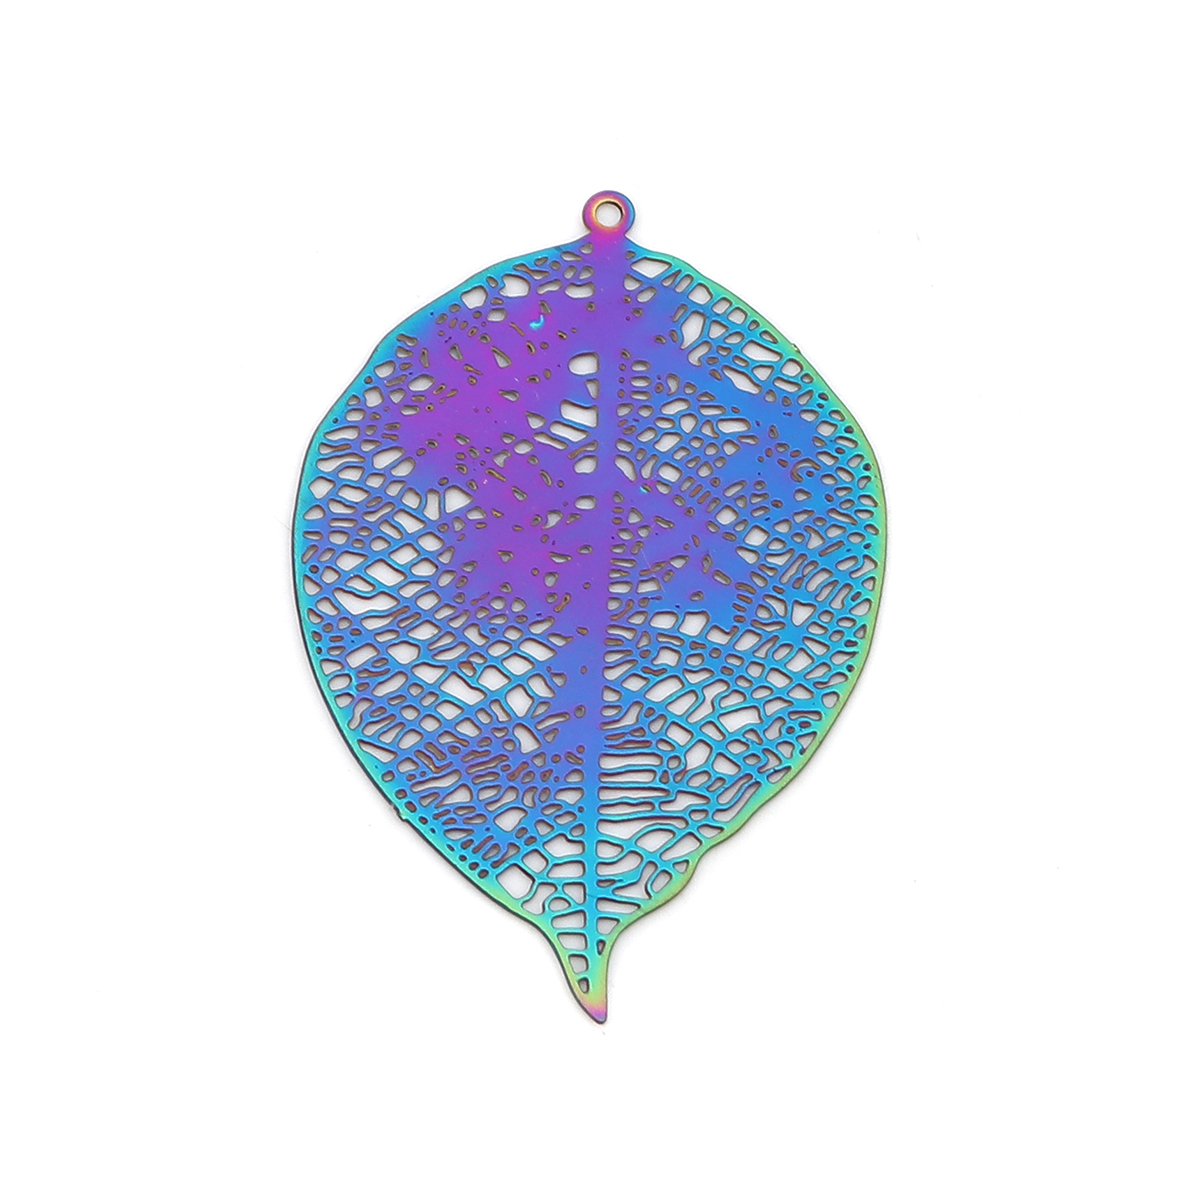 Picture of Stainless Steel Filigree Stamping Pendants Leaf Purple & Blue 43mm x 29mm, 10 PCs